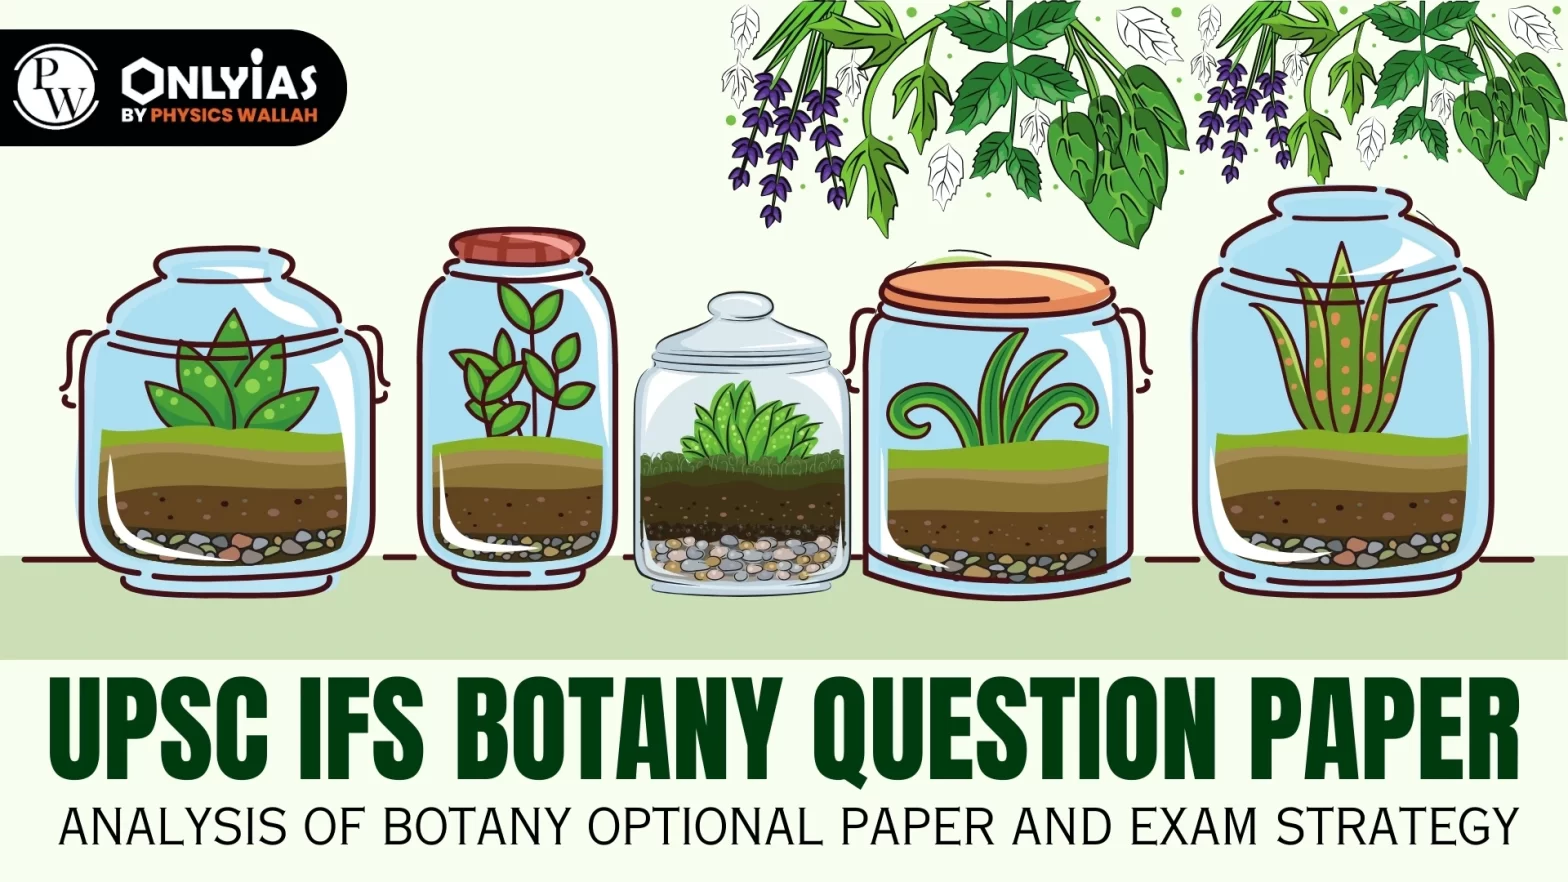 UPSC IFS Botany Question Paper: Analysis of Botany Optional Paper and Exam Strategy